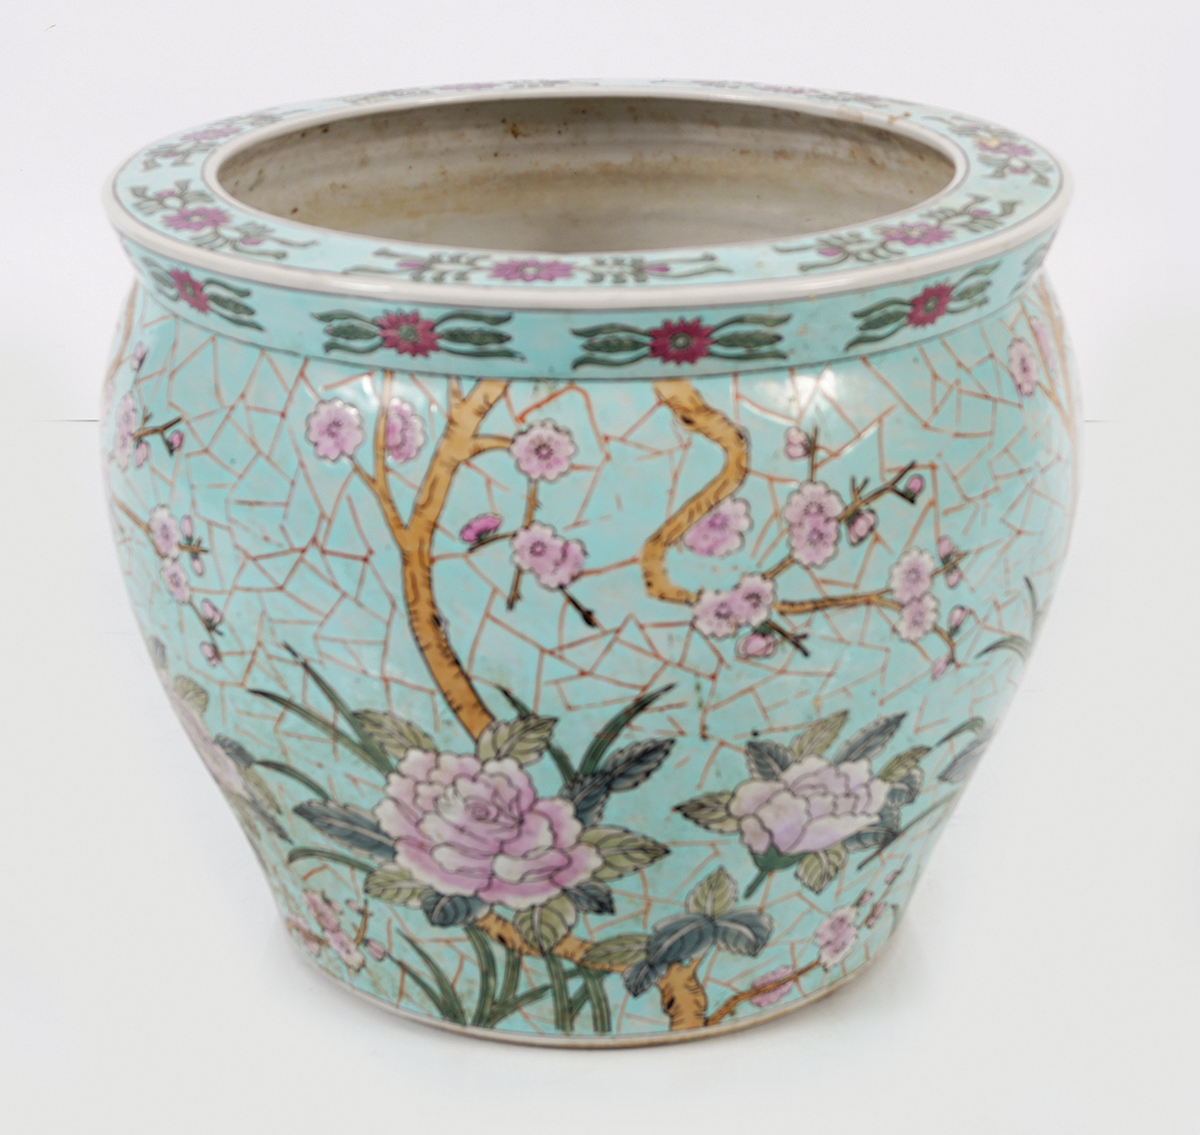 LARGE CHINESE REPUBLICAN POLYCHROME FISH BOWL